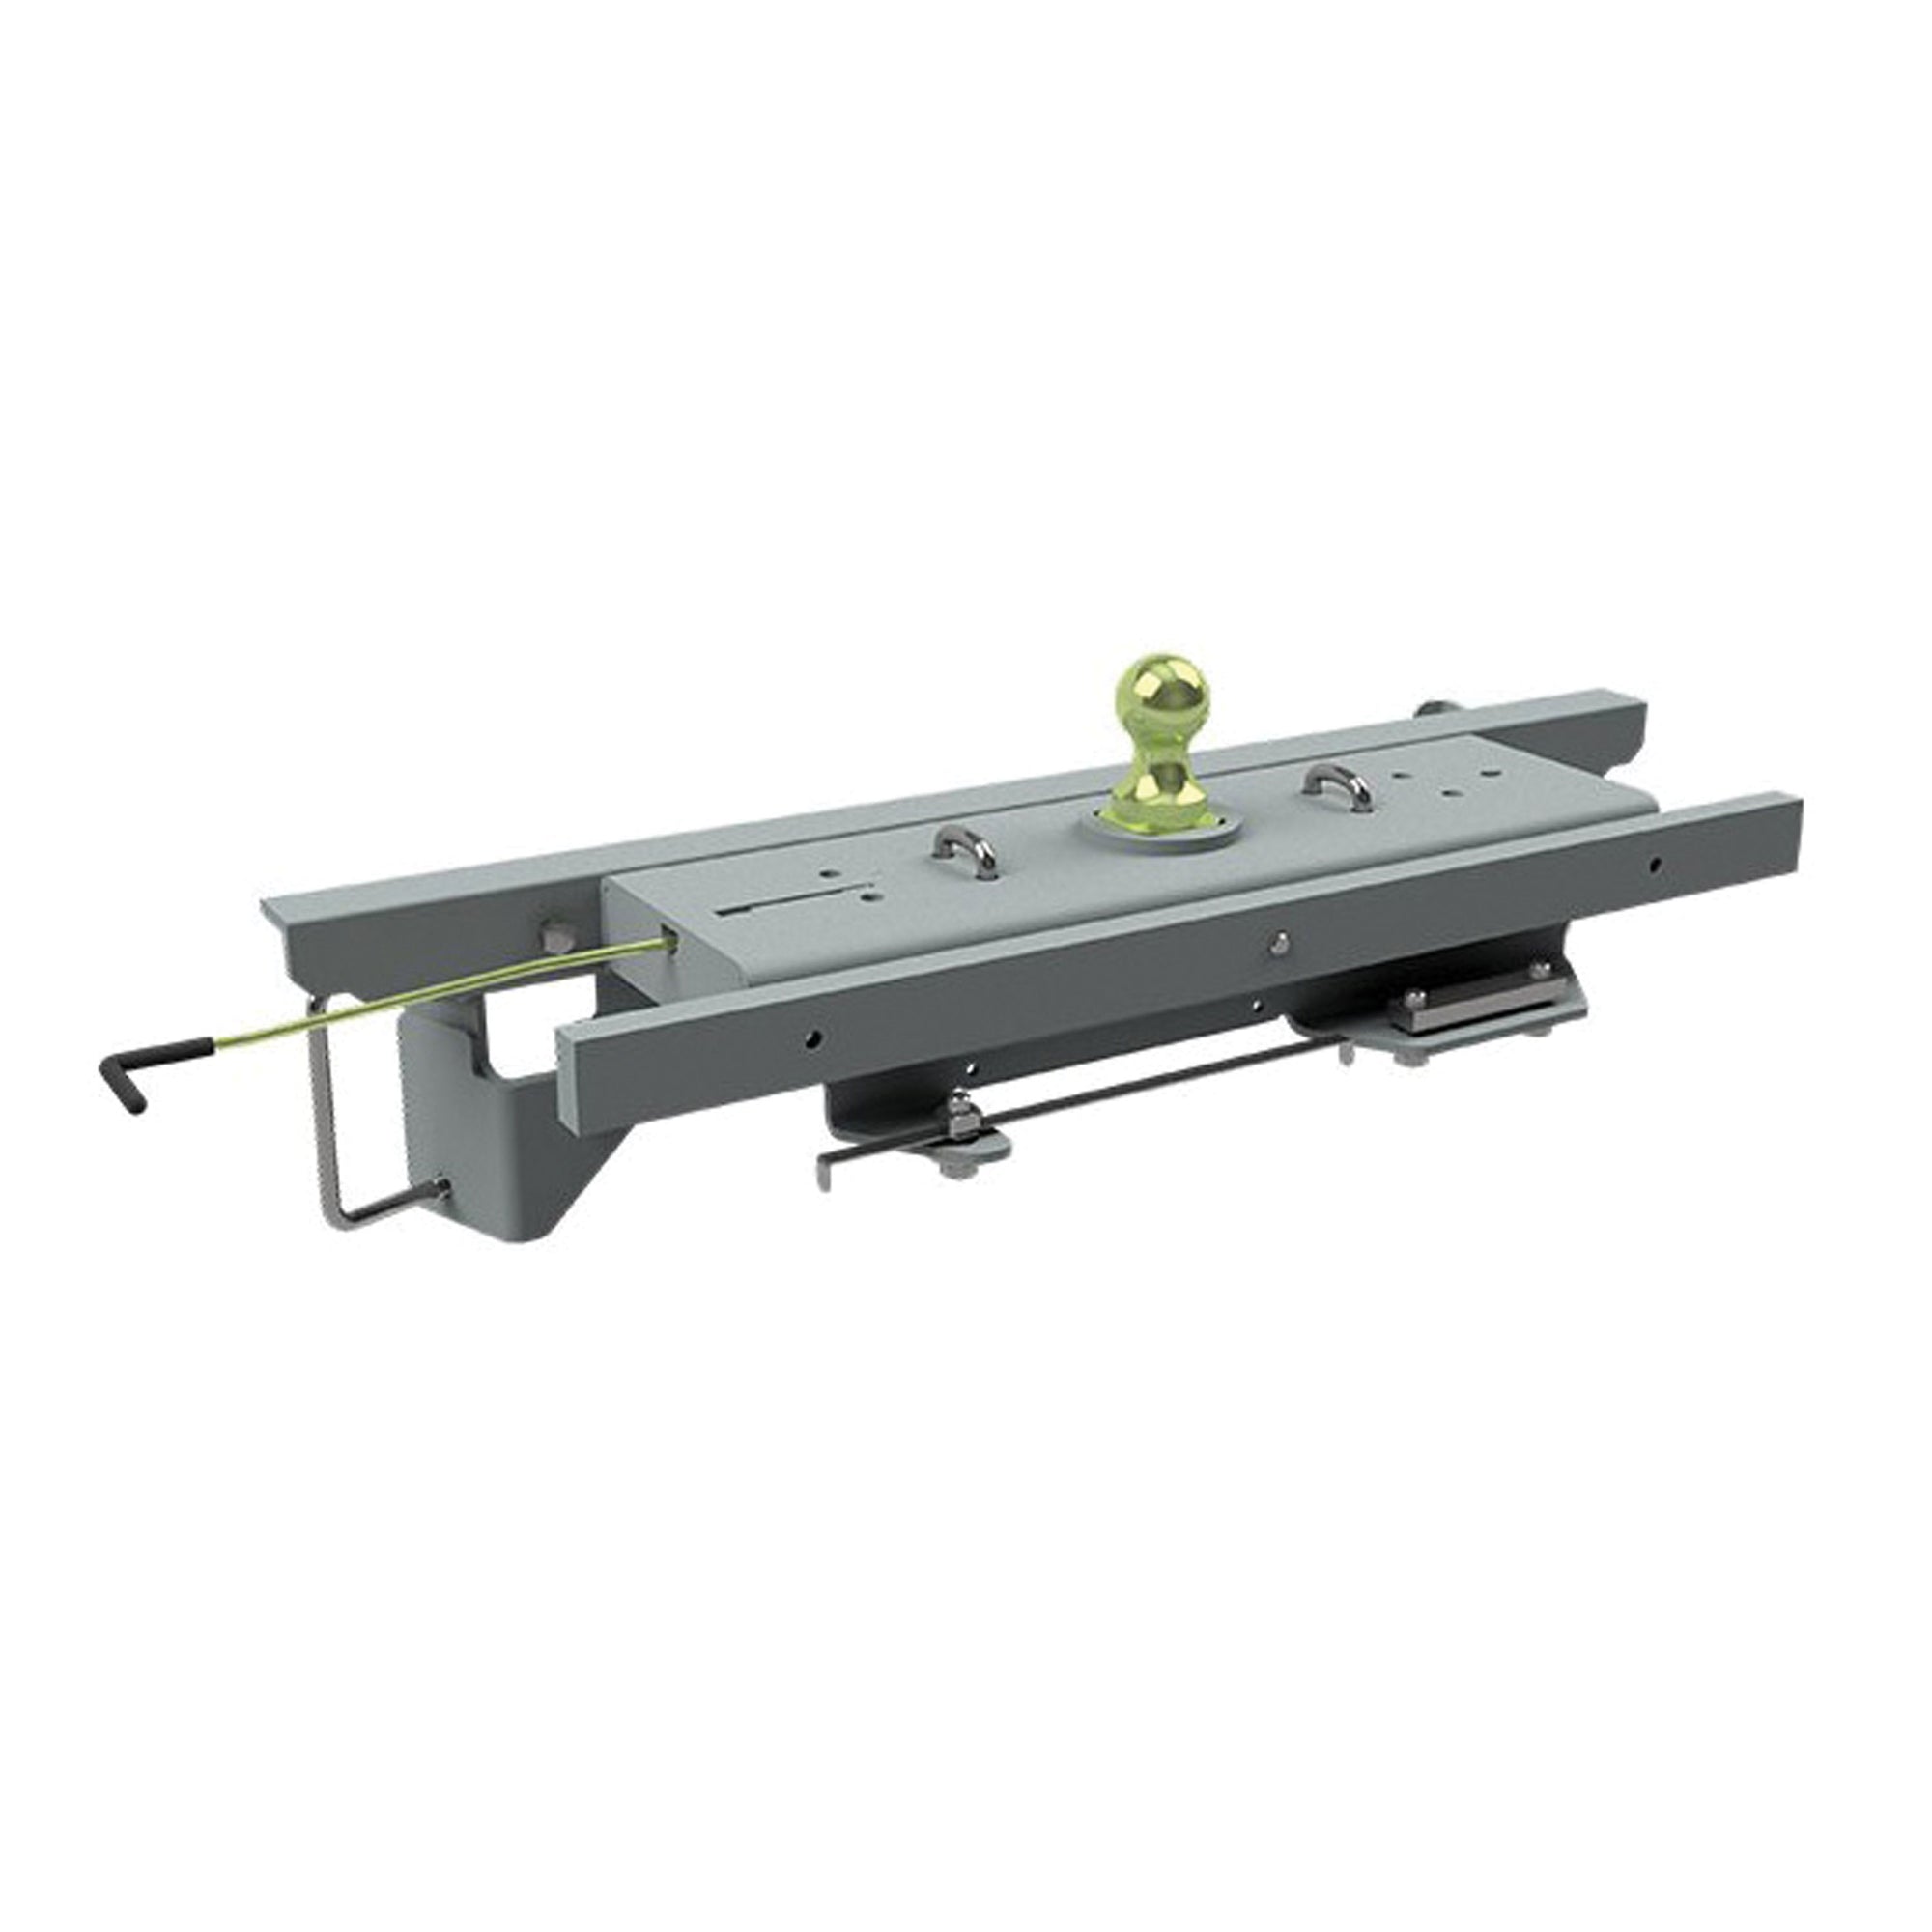 B&W Trailer Hitches GNRK1319 Turnoverball Gooseneck Hitch for RAM 1500 (2019-2021), Excludes 1500 Classic & TRX